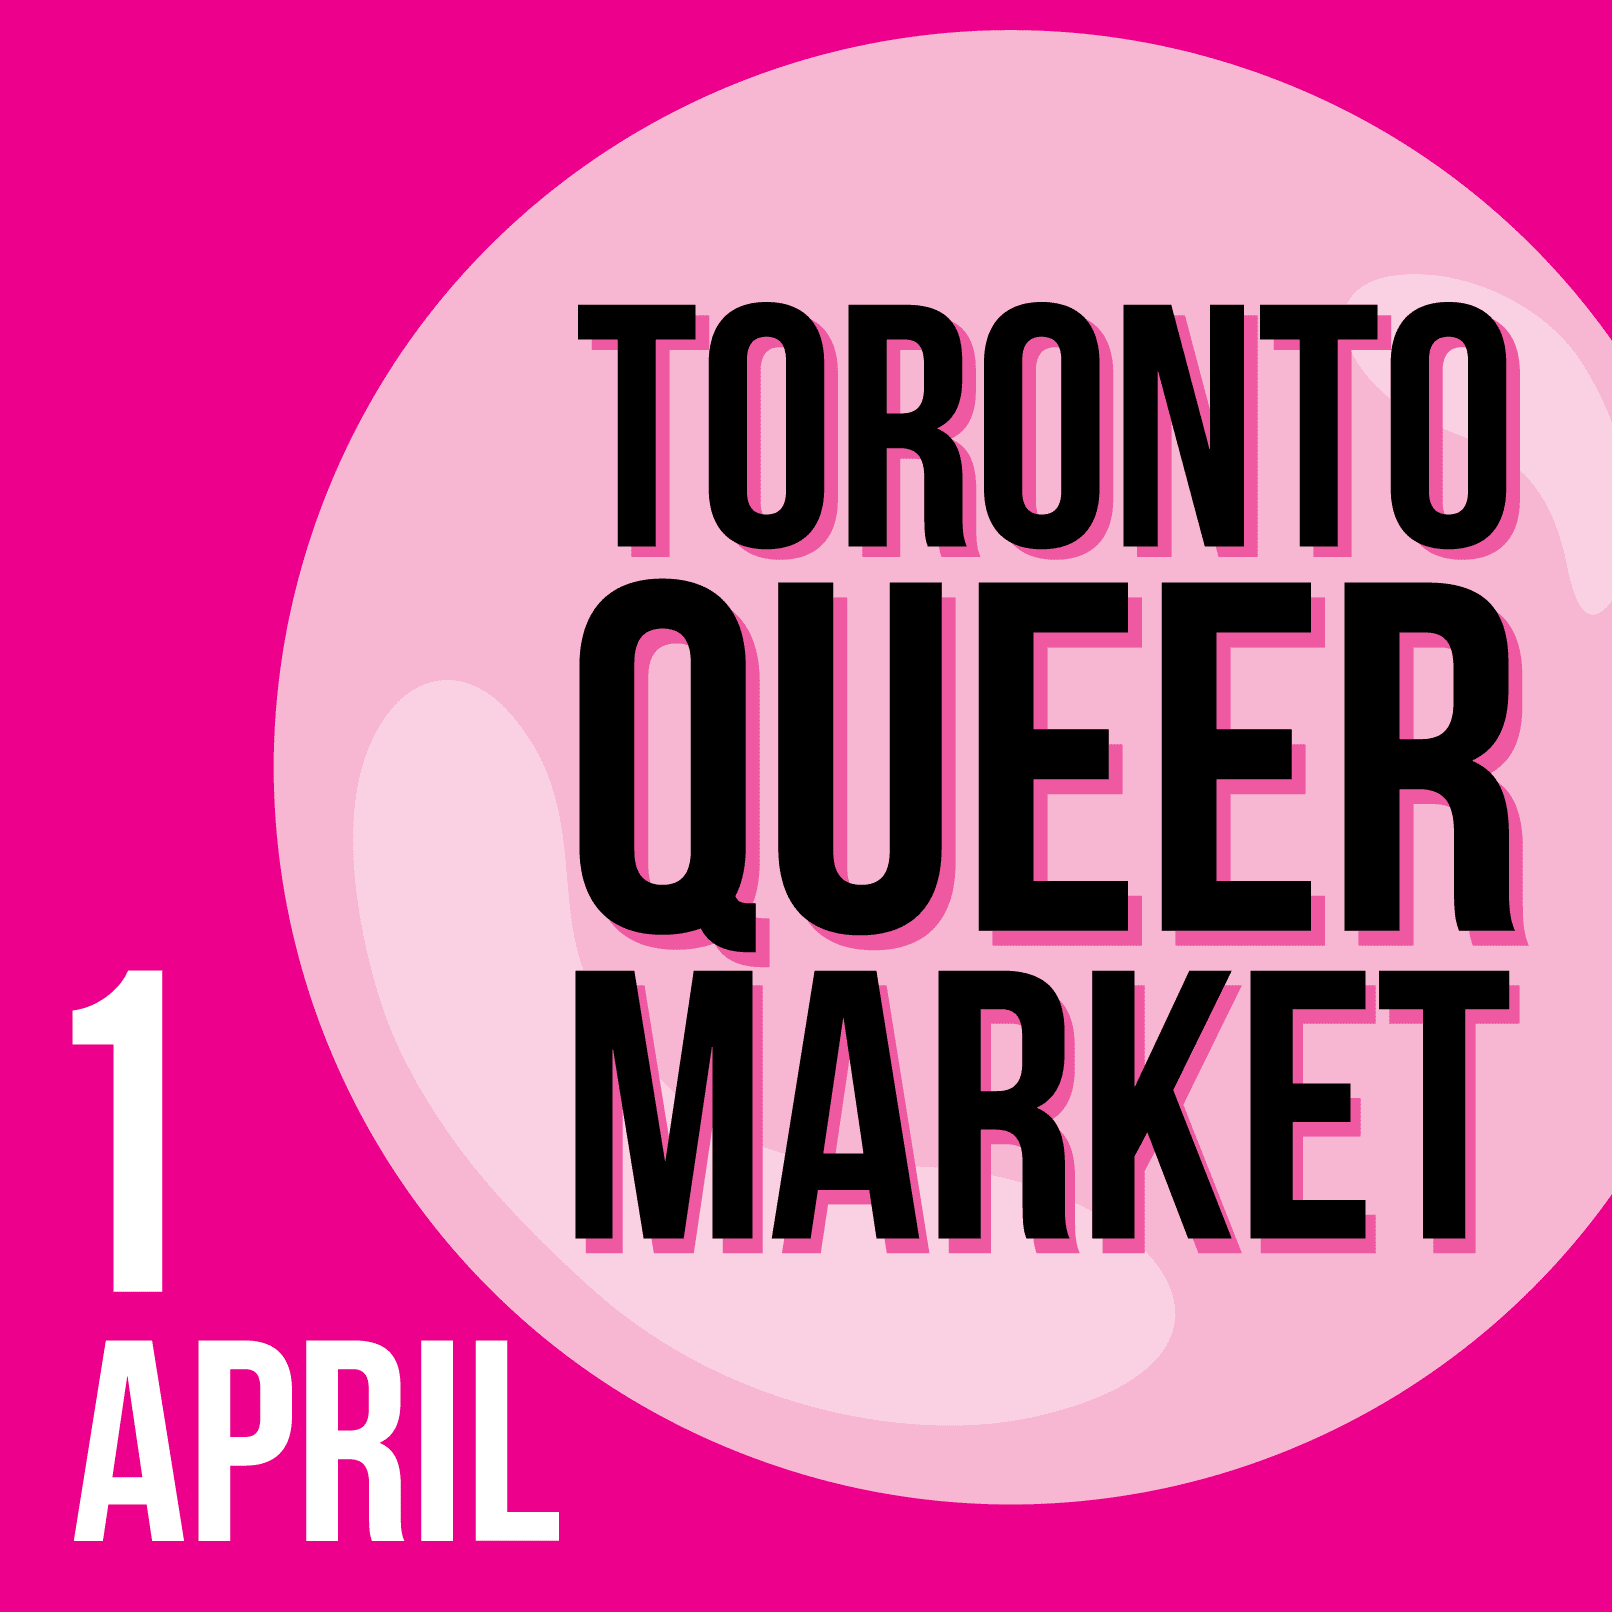 Toronto Queer Market April 1st at The 519 by Church St and Wellesley St